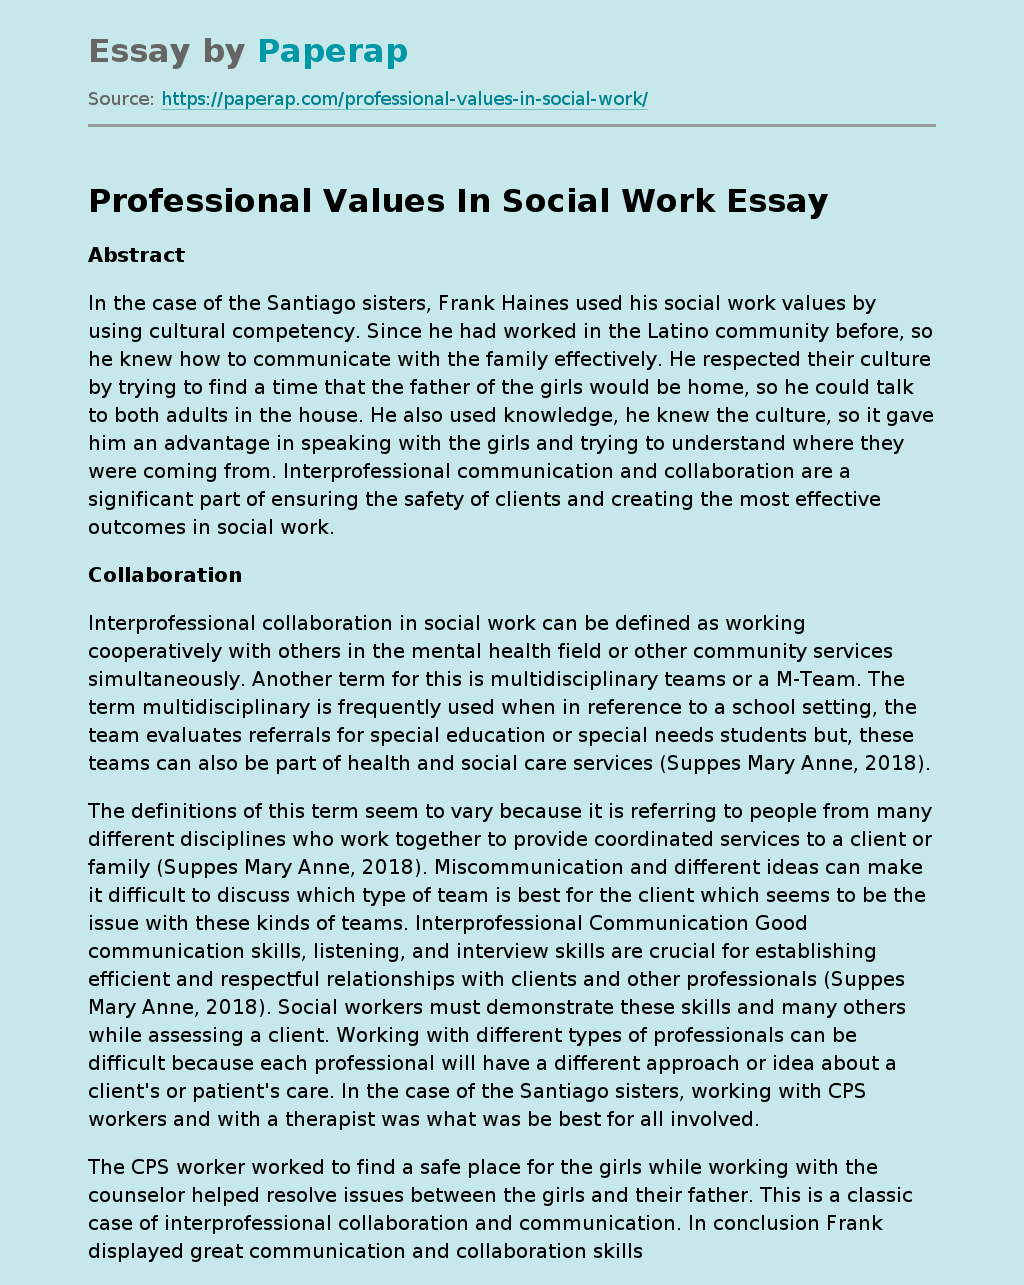 Professional Values In Social Work